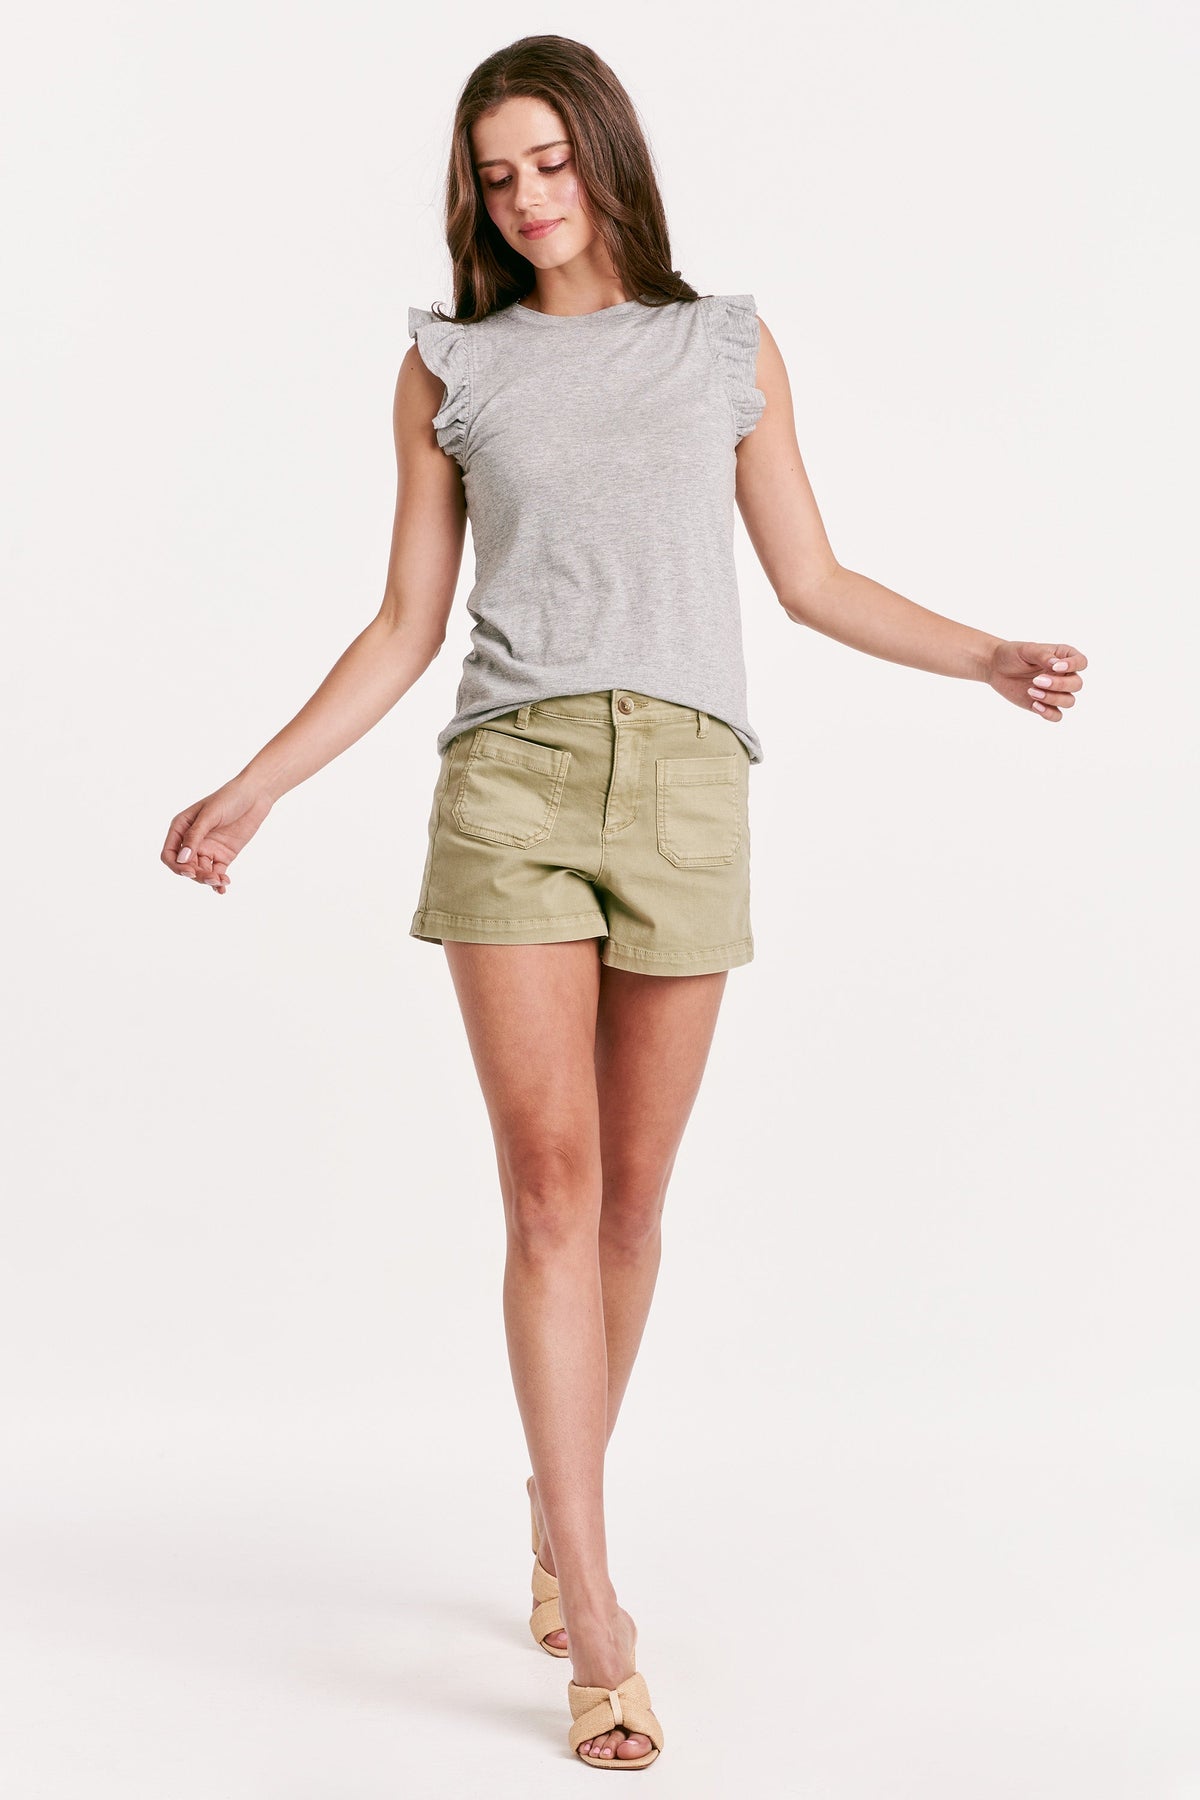 north-ruffle-trimmed-top-heather-gray